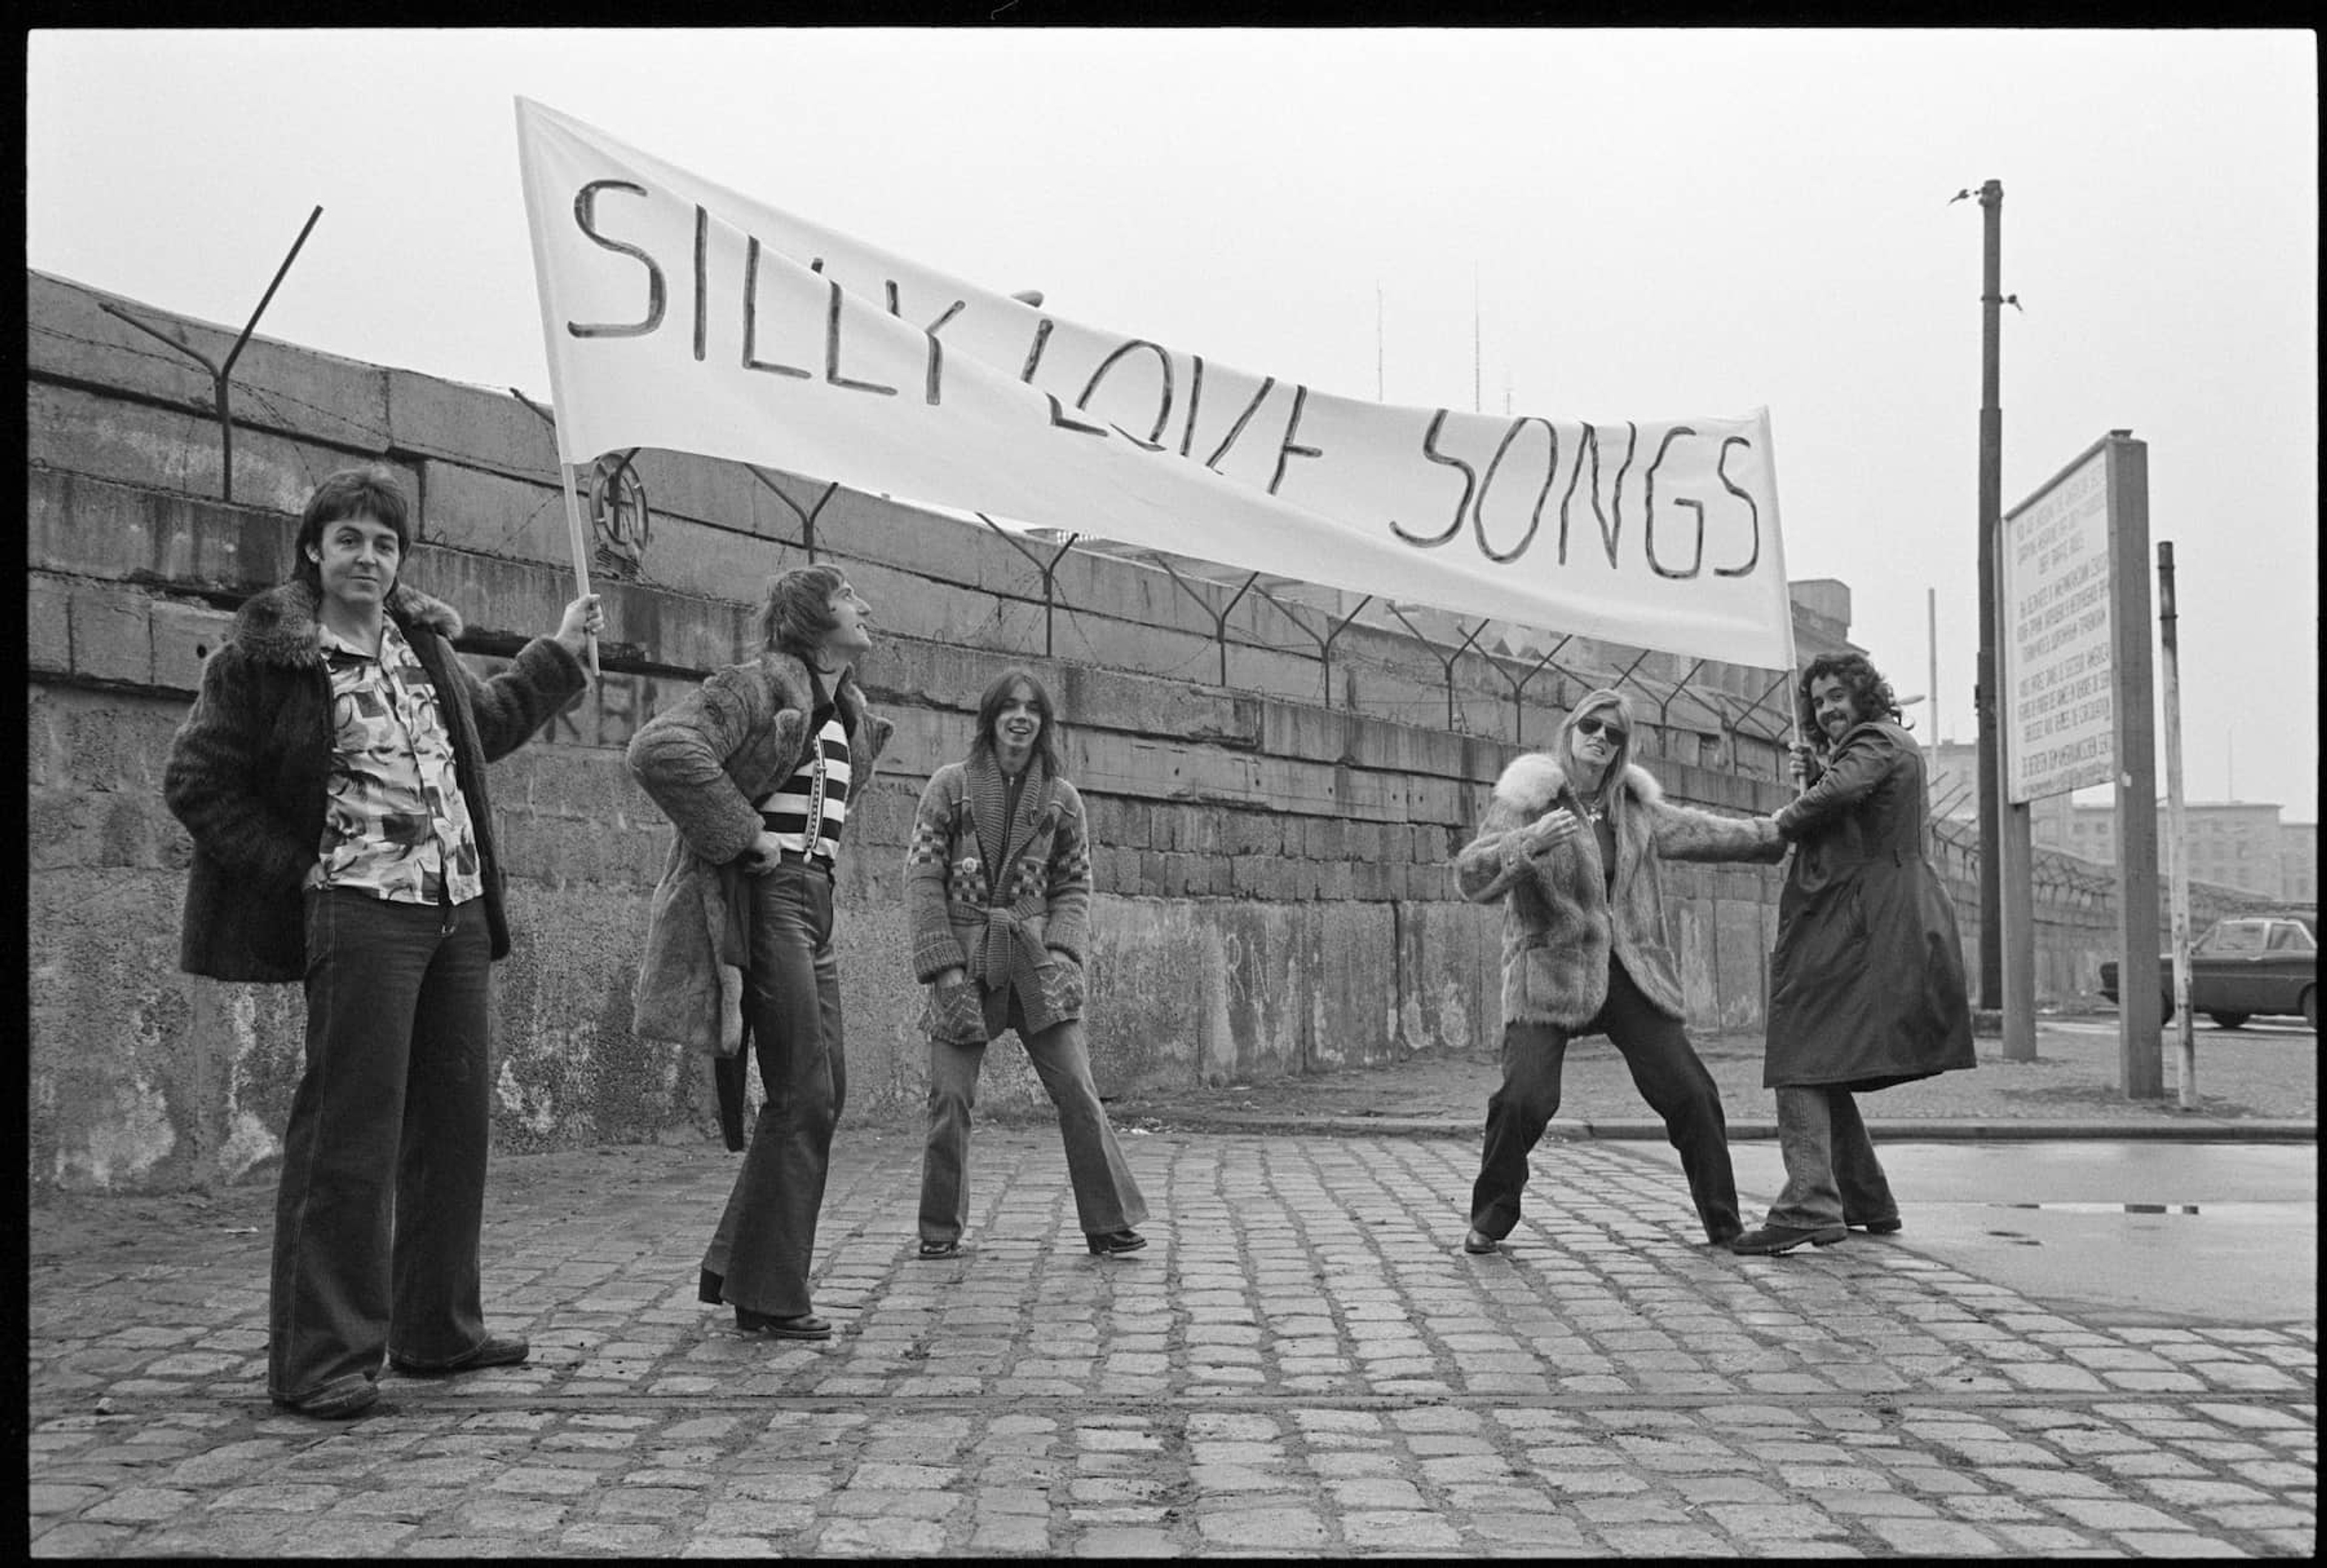 Members of Wings hold up a banner which reads 'SILLY LOVE SONGS'